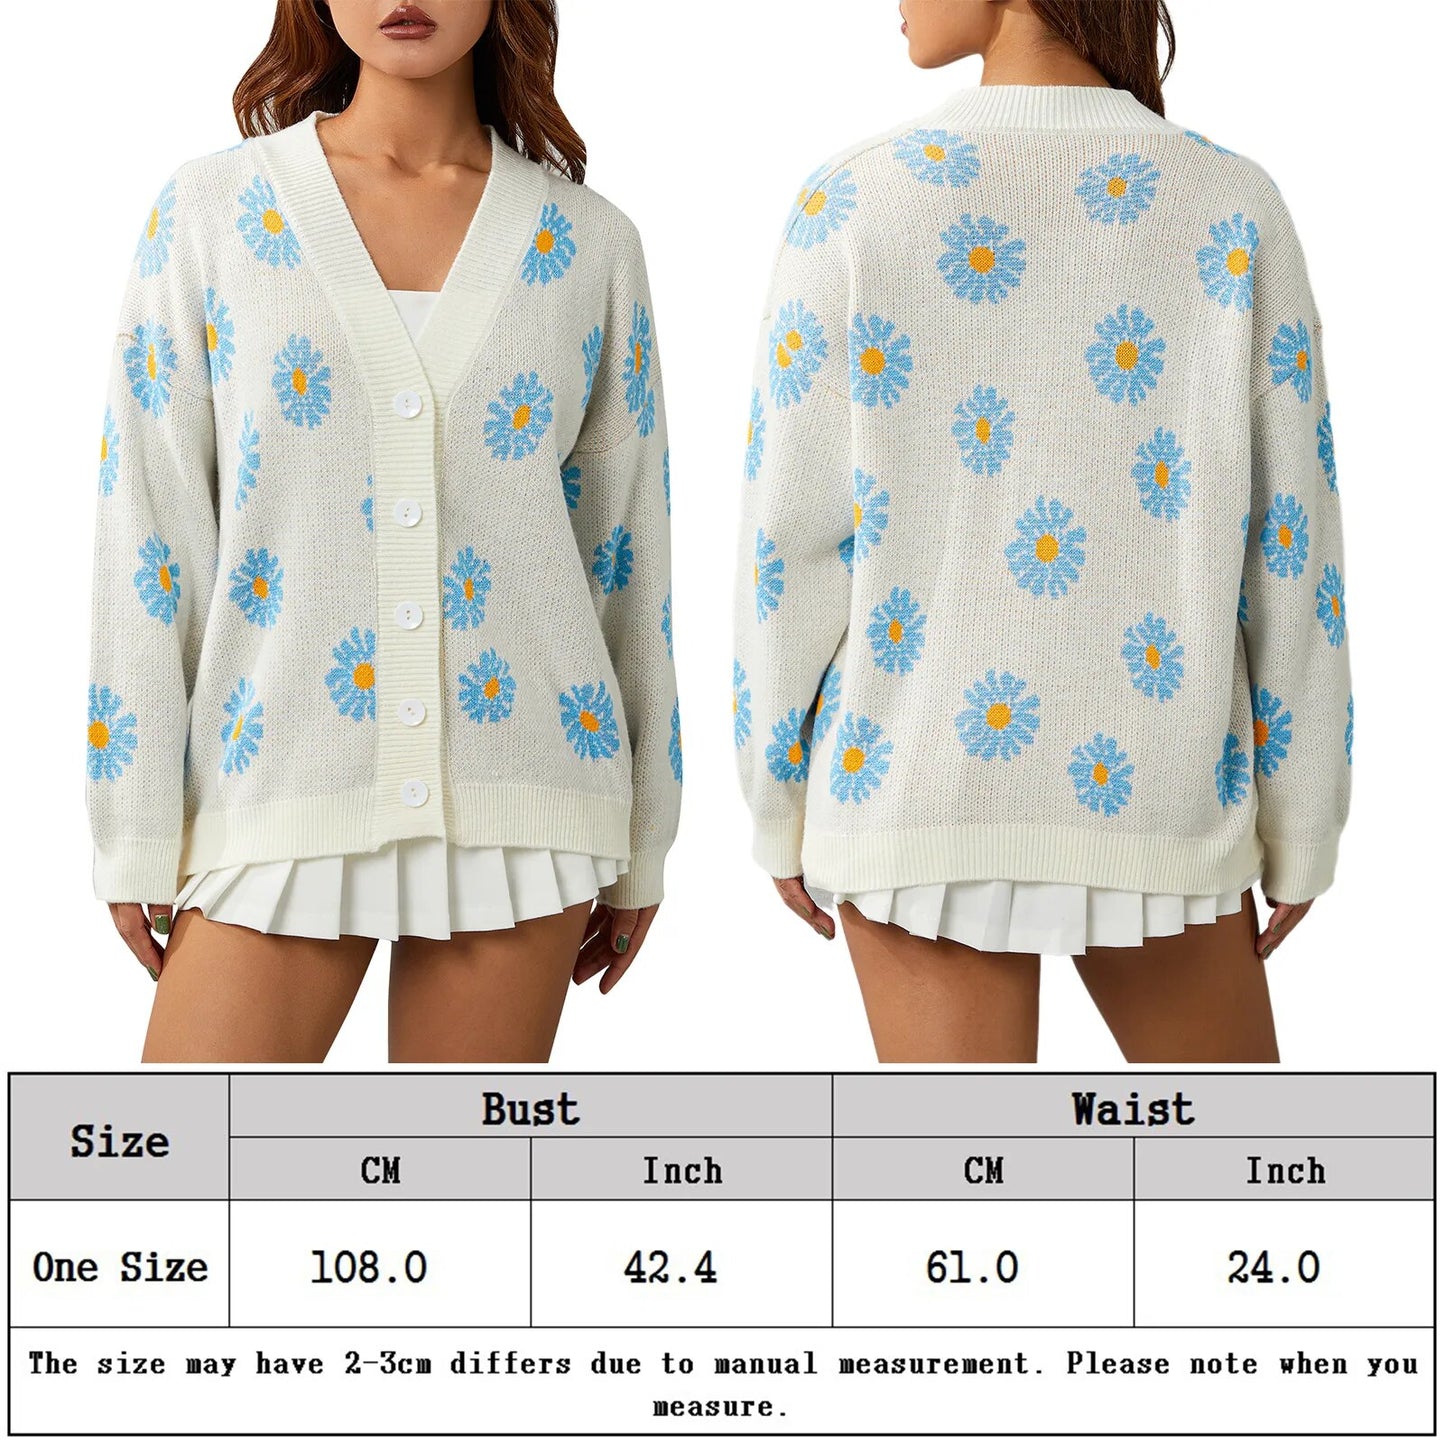 Sweater Open Front Cardigan Long Sleeve Women Floral Print Cardigan Daisy